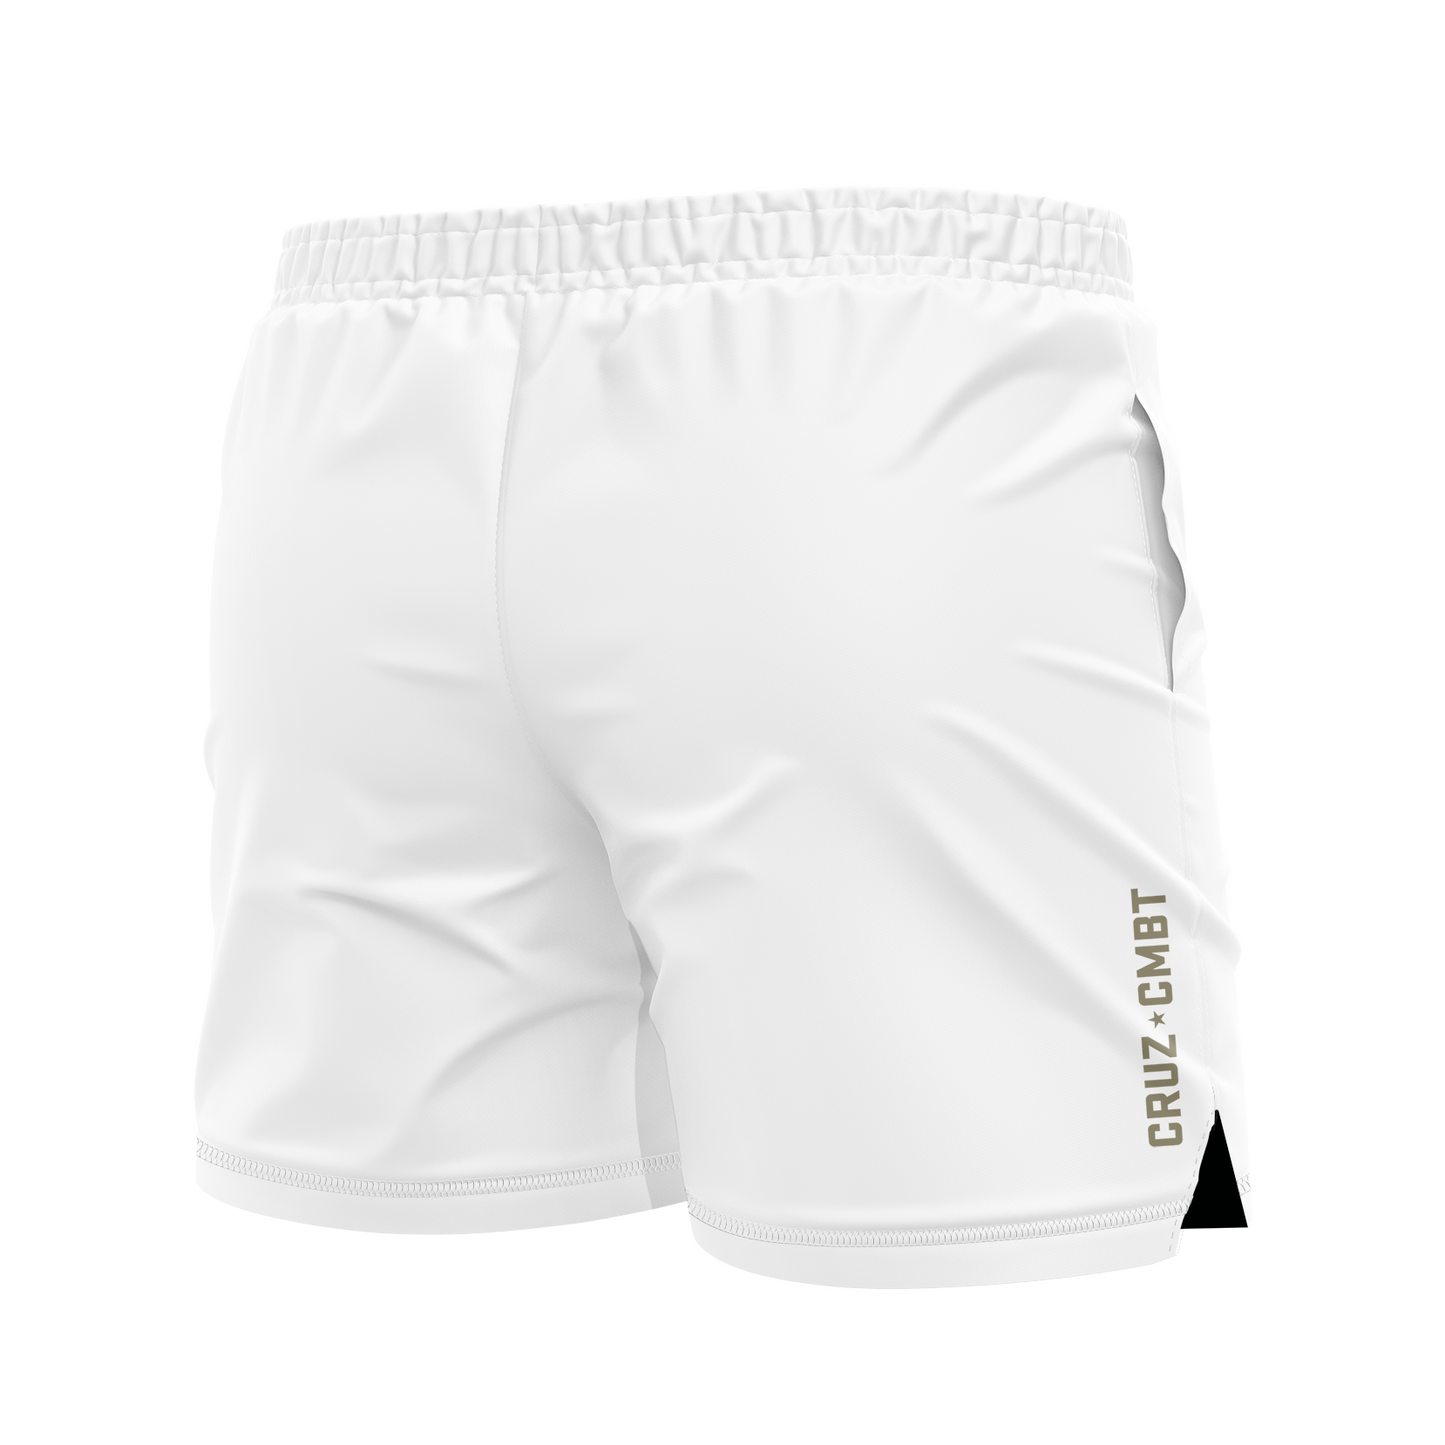 Base Collection men's FC shorts, white and gold